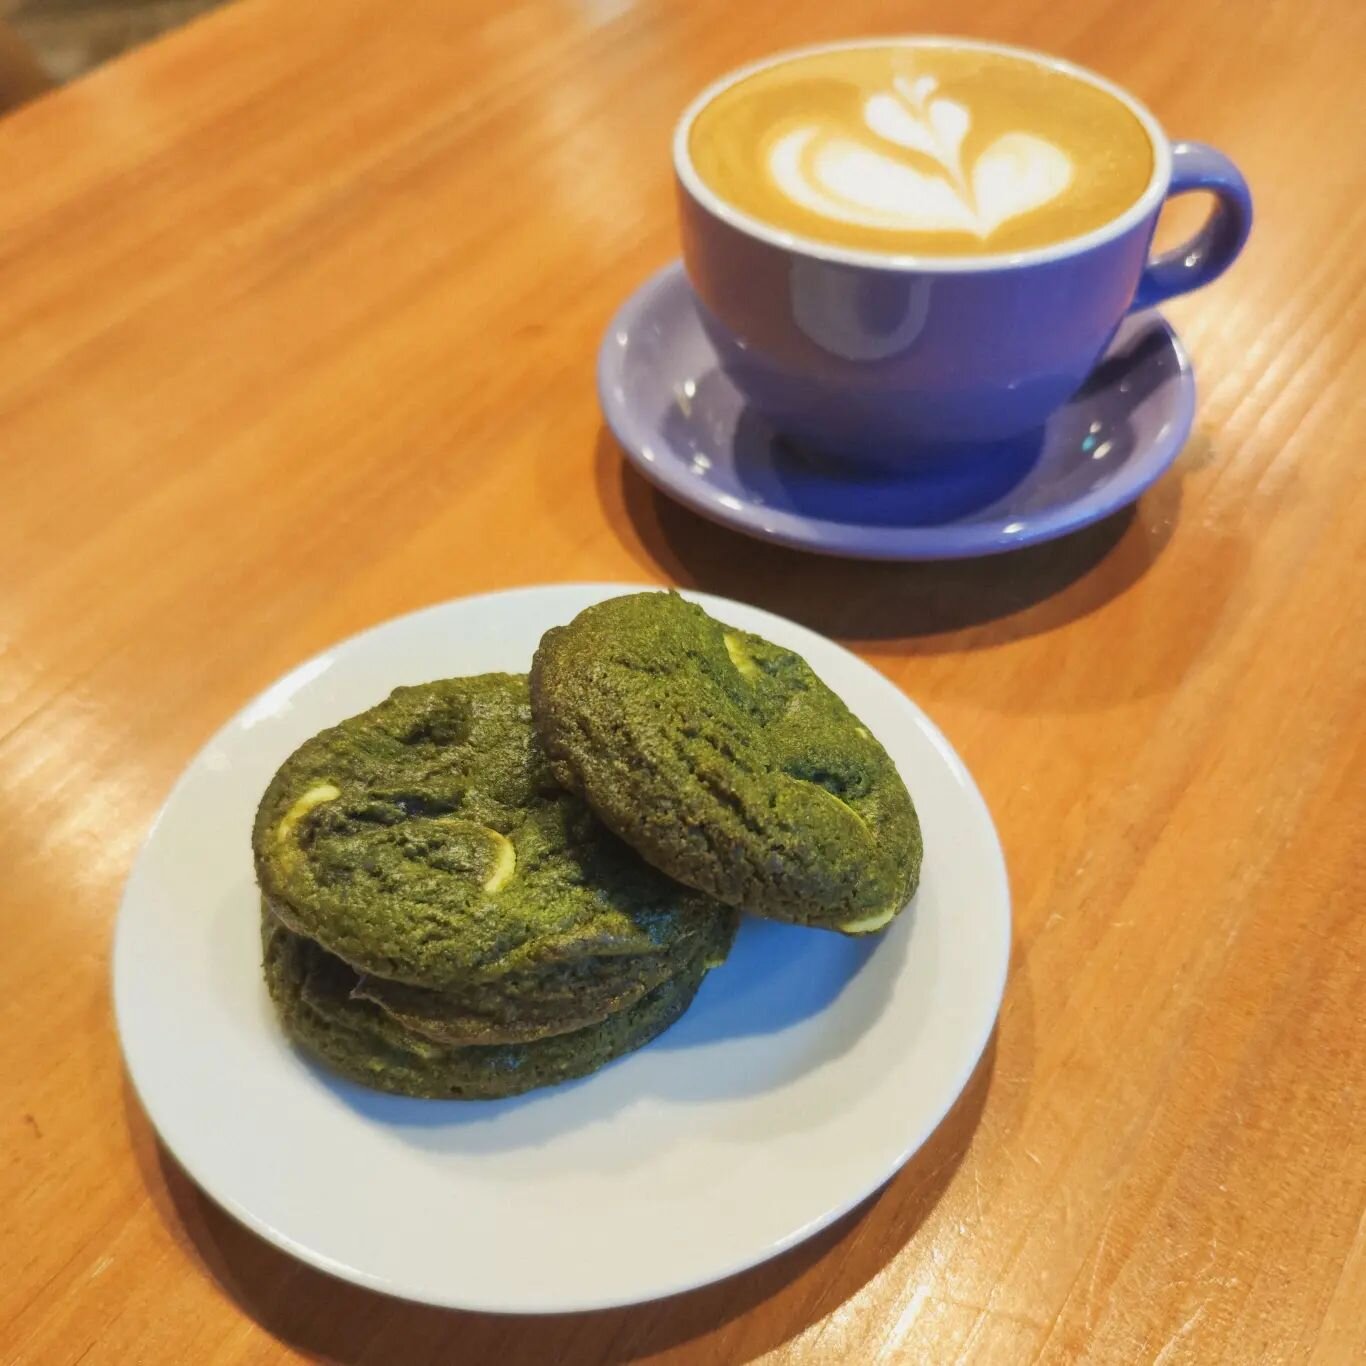 【New Menu】White Chocolate Matcha Cookies
ホワイトチョコ抹茶クッキー

Did you get our hint earlier this week?
Finally, it's off the secret menu and on our actually printed menus!

The sweetness of the white chocolate complements the slight bitterness and flavor of